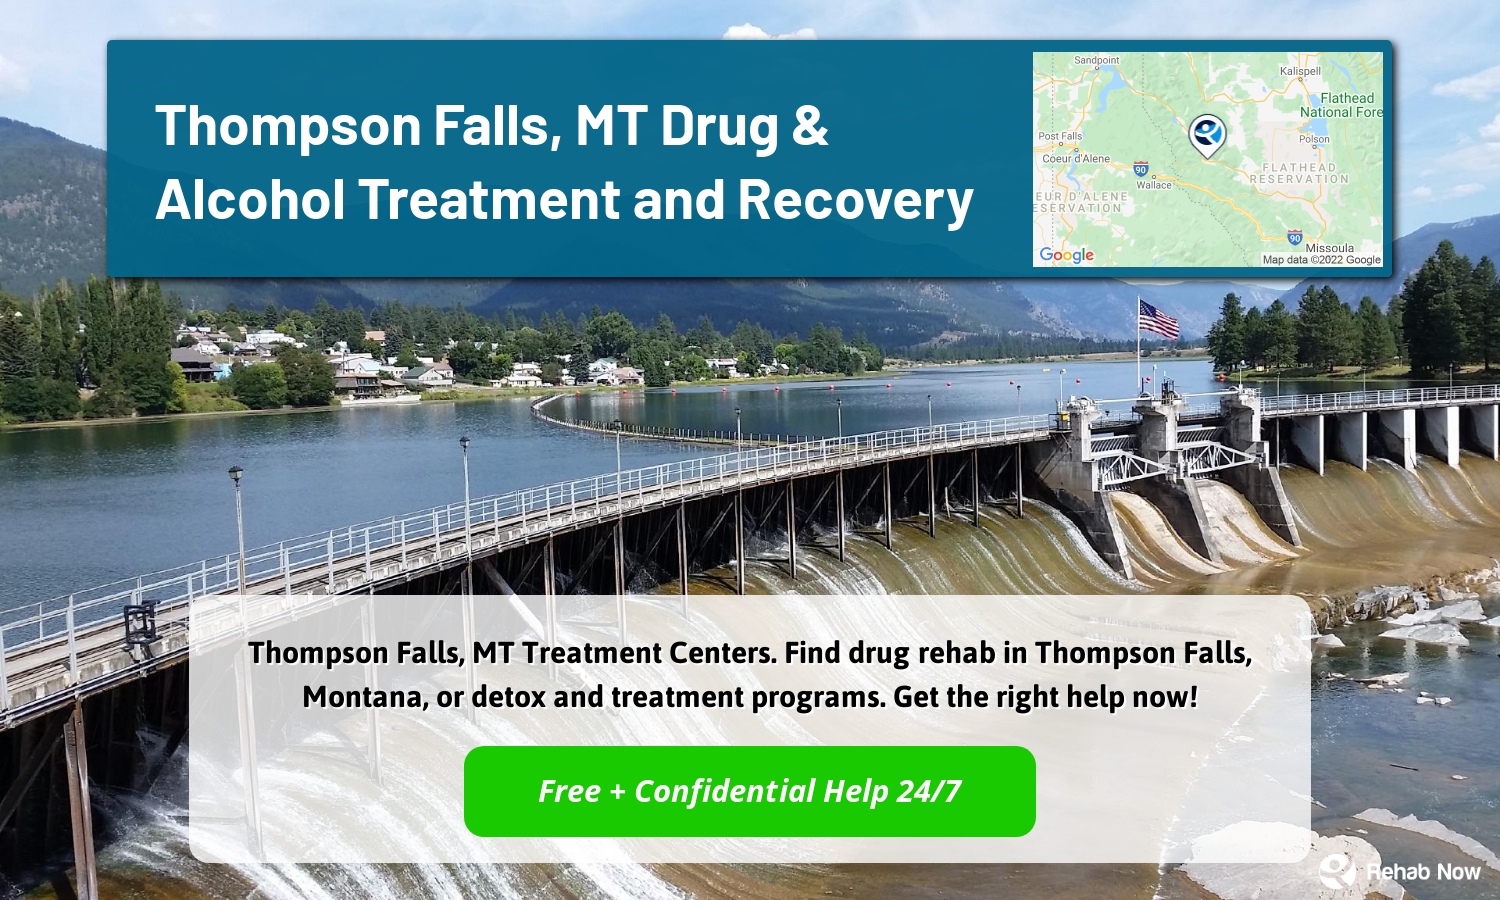 Thompson Falls, MT Treatment Centers. Find drug rehab in Thompson Falls, Montana, or detox and treatment programs. Get the right help now!